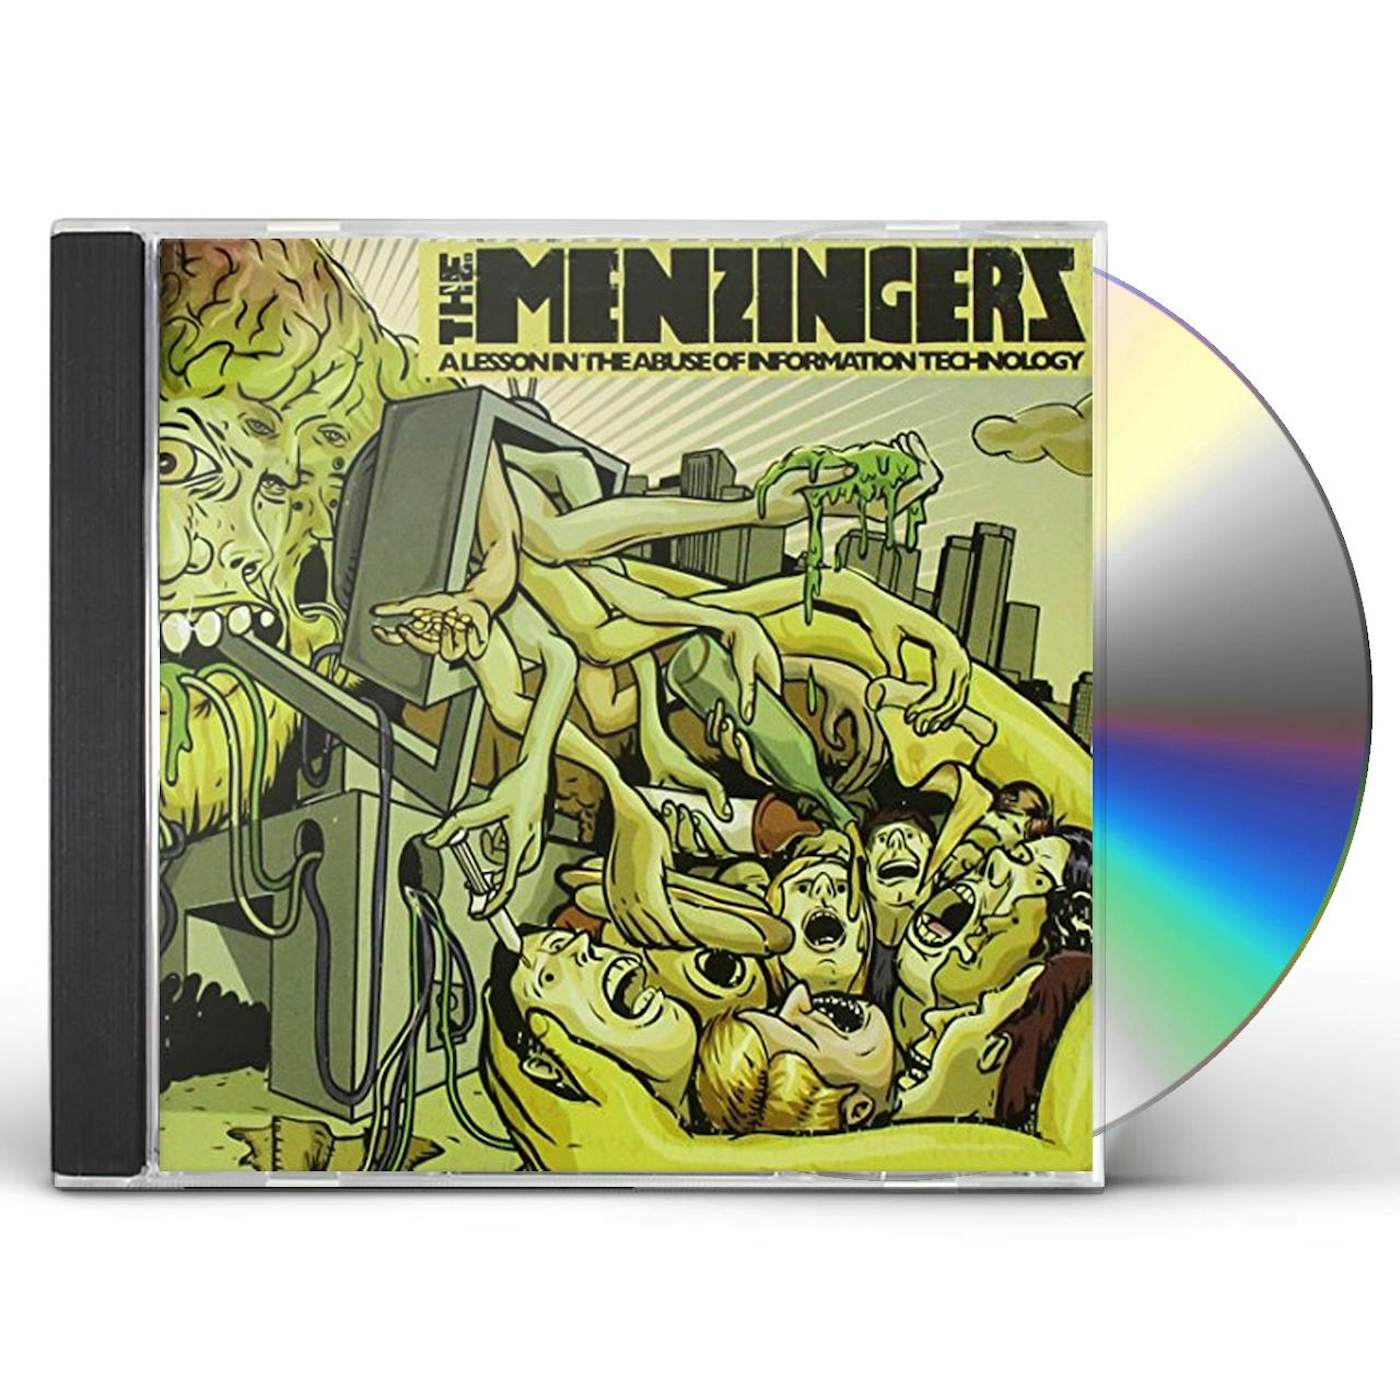 The Menzingers LESSON IN THE ABUSE OF INFORMATION TECHNOLOGY CD